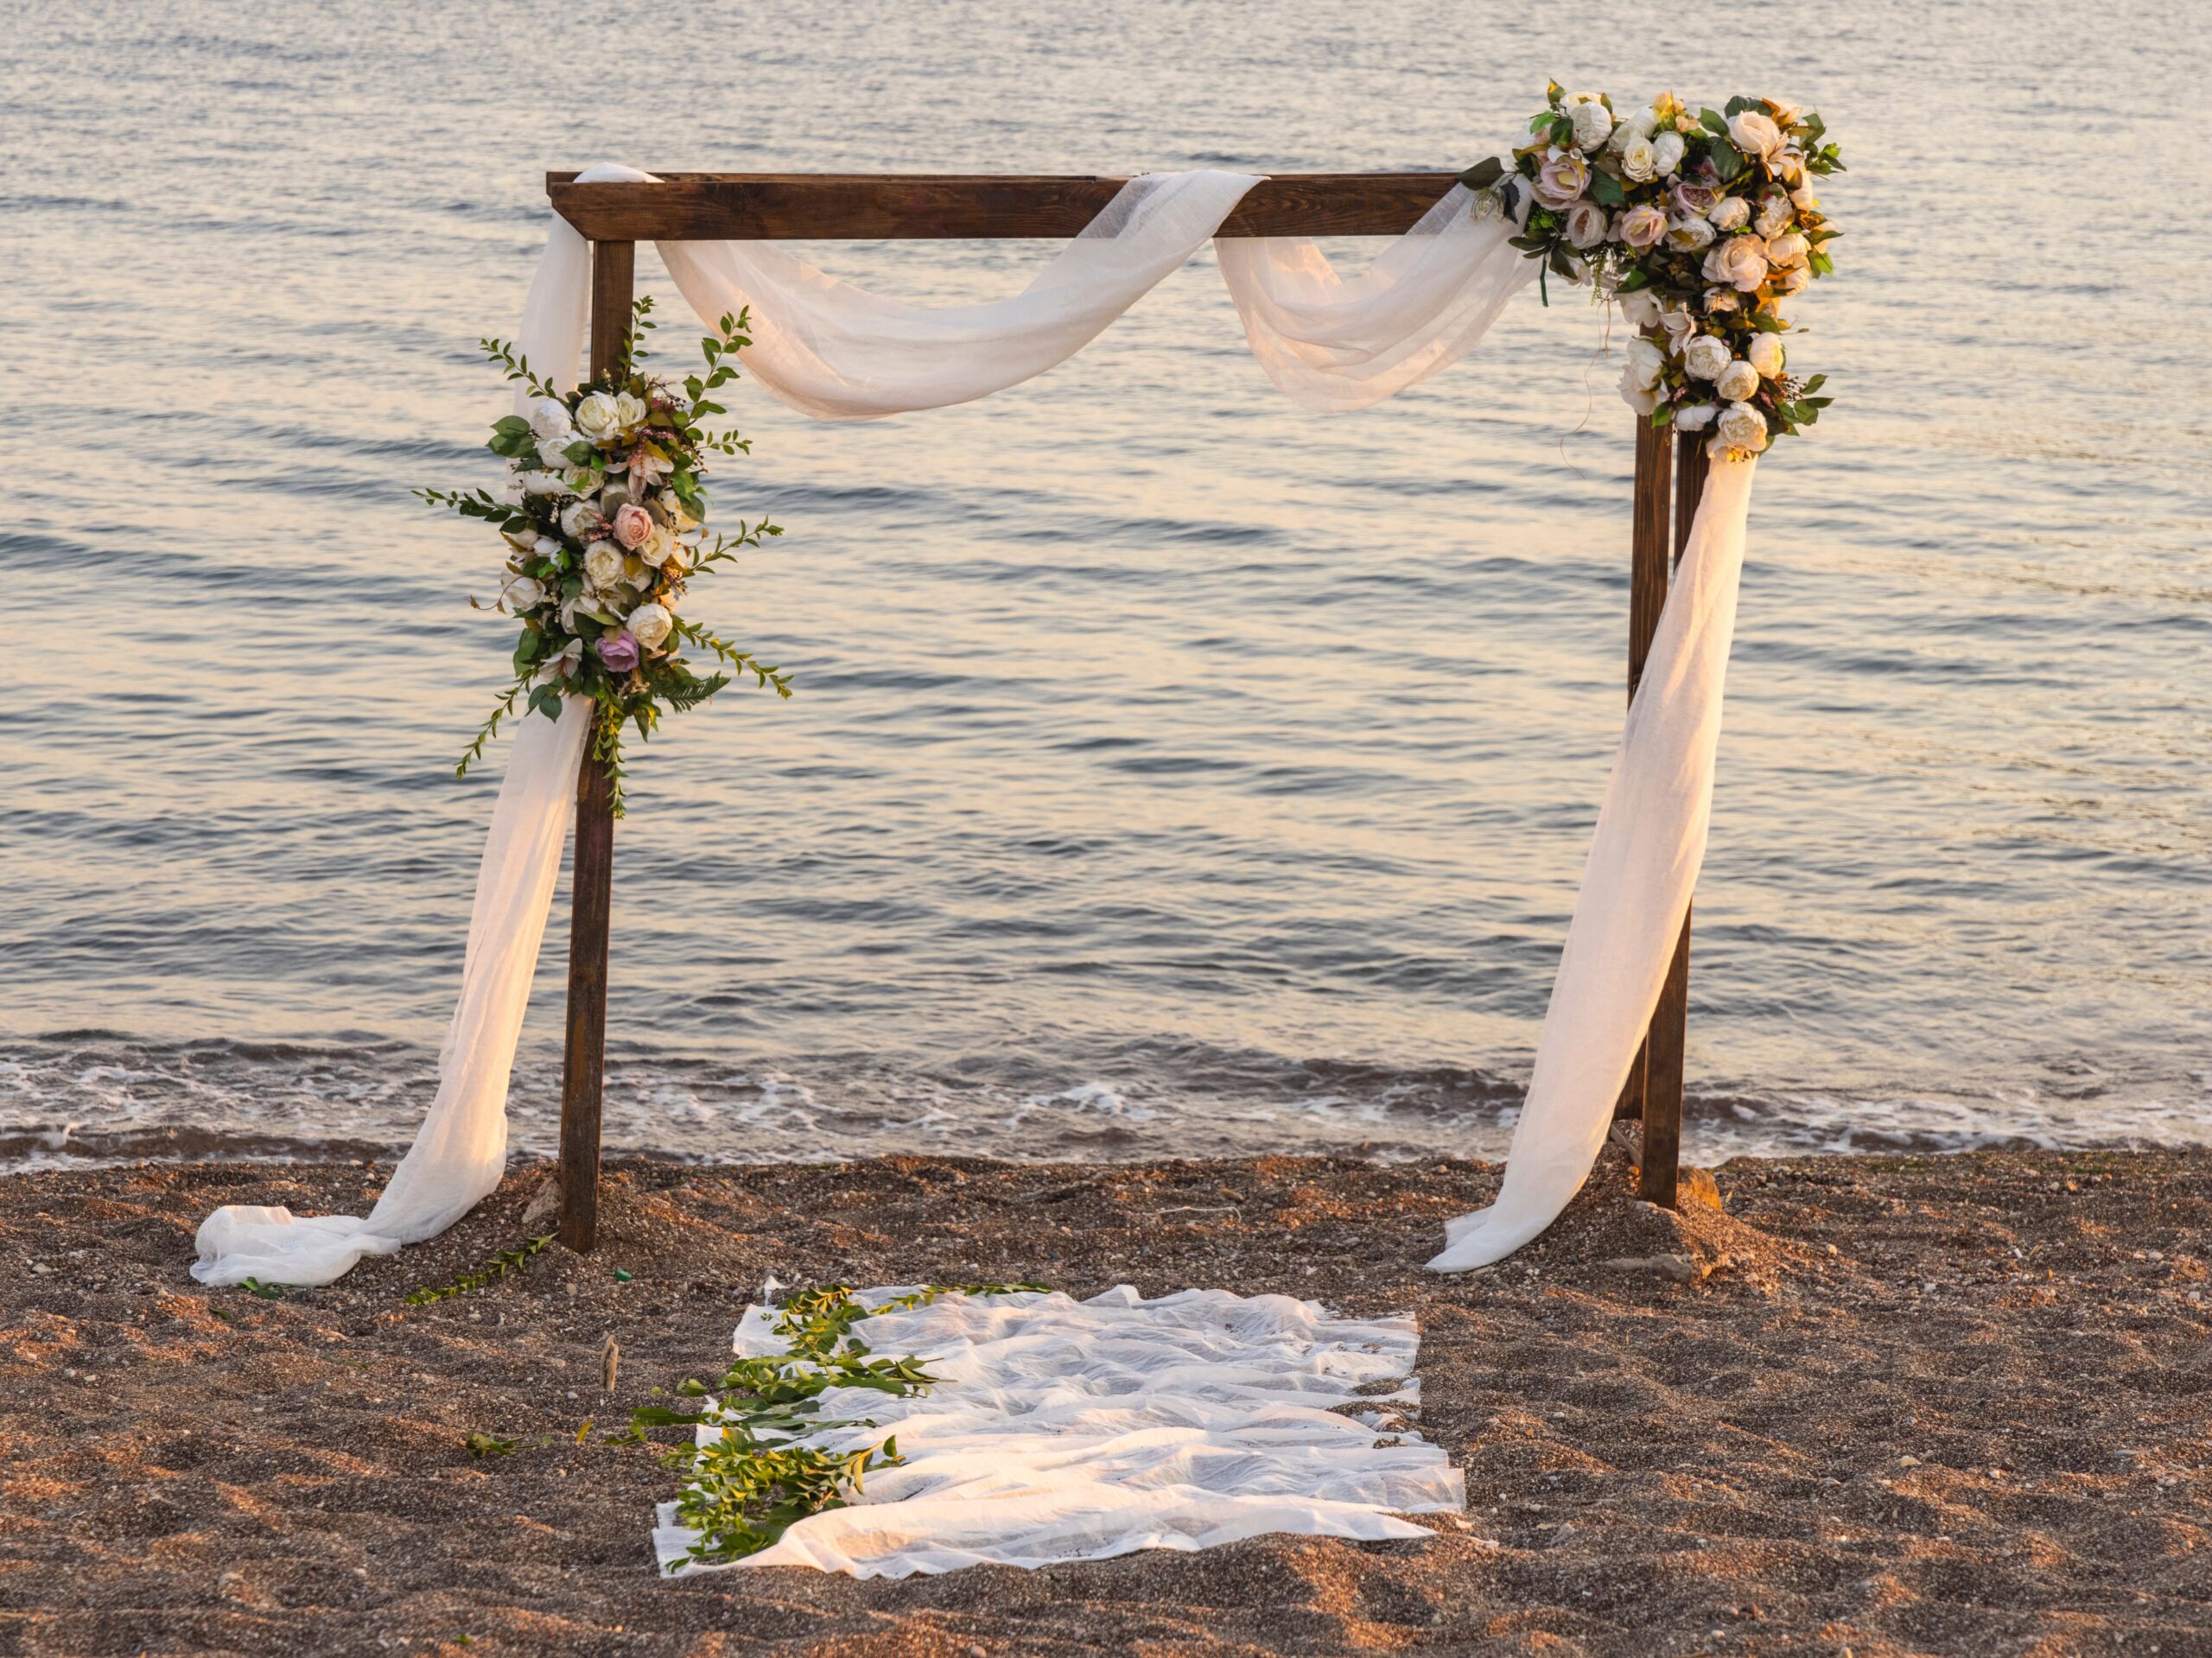 A wooden alter on a beach covered in flowers.